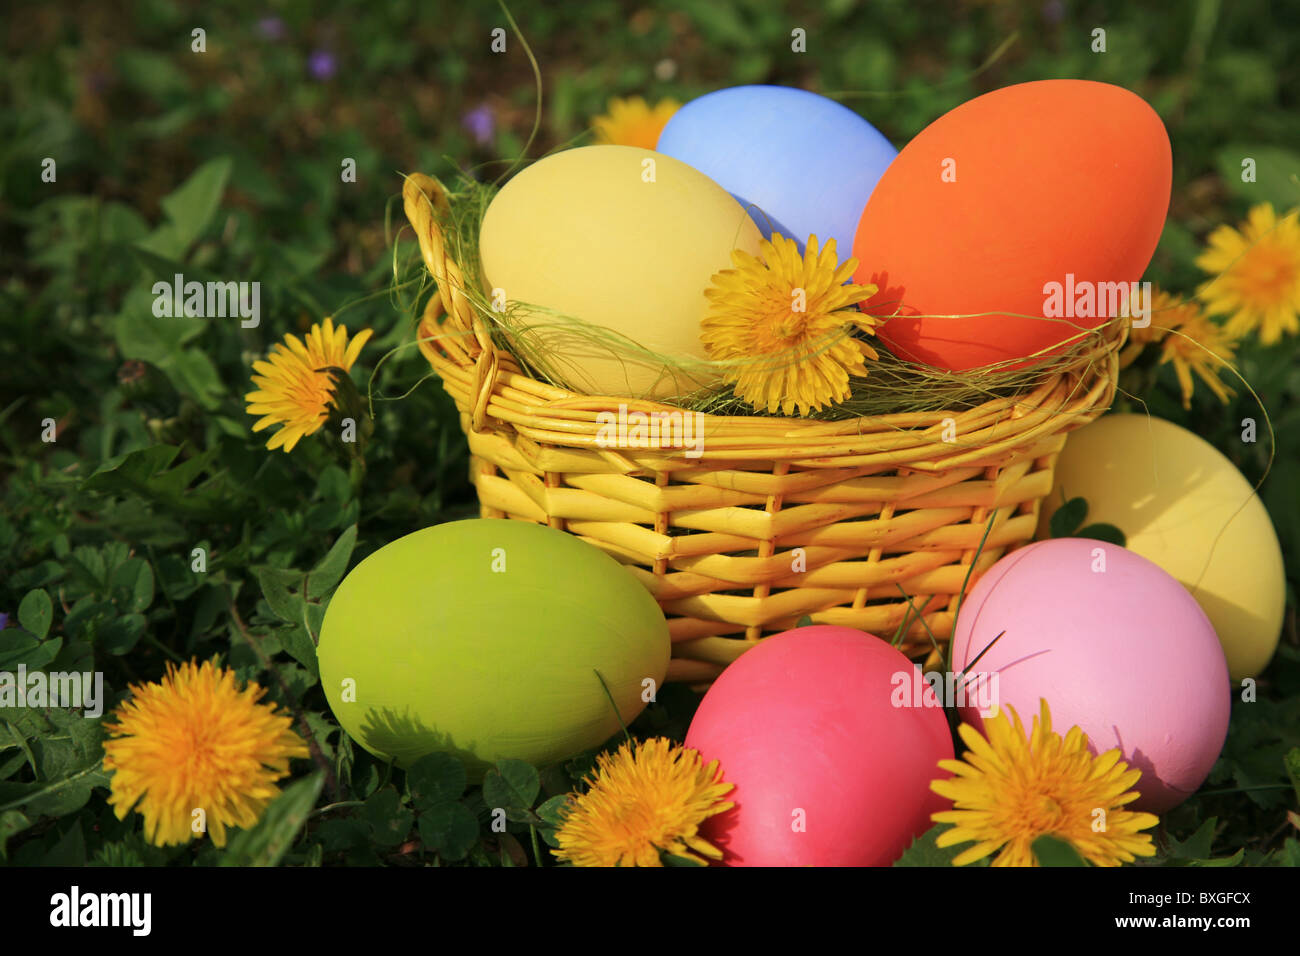 Basket full of colorful easter eggs Stock Photo